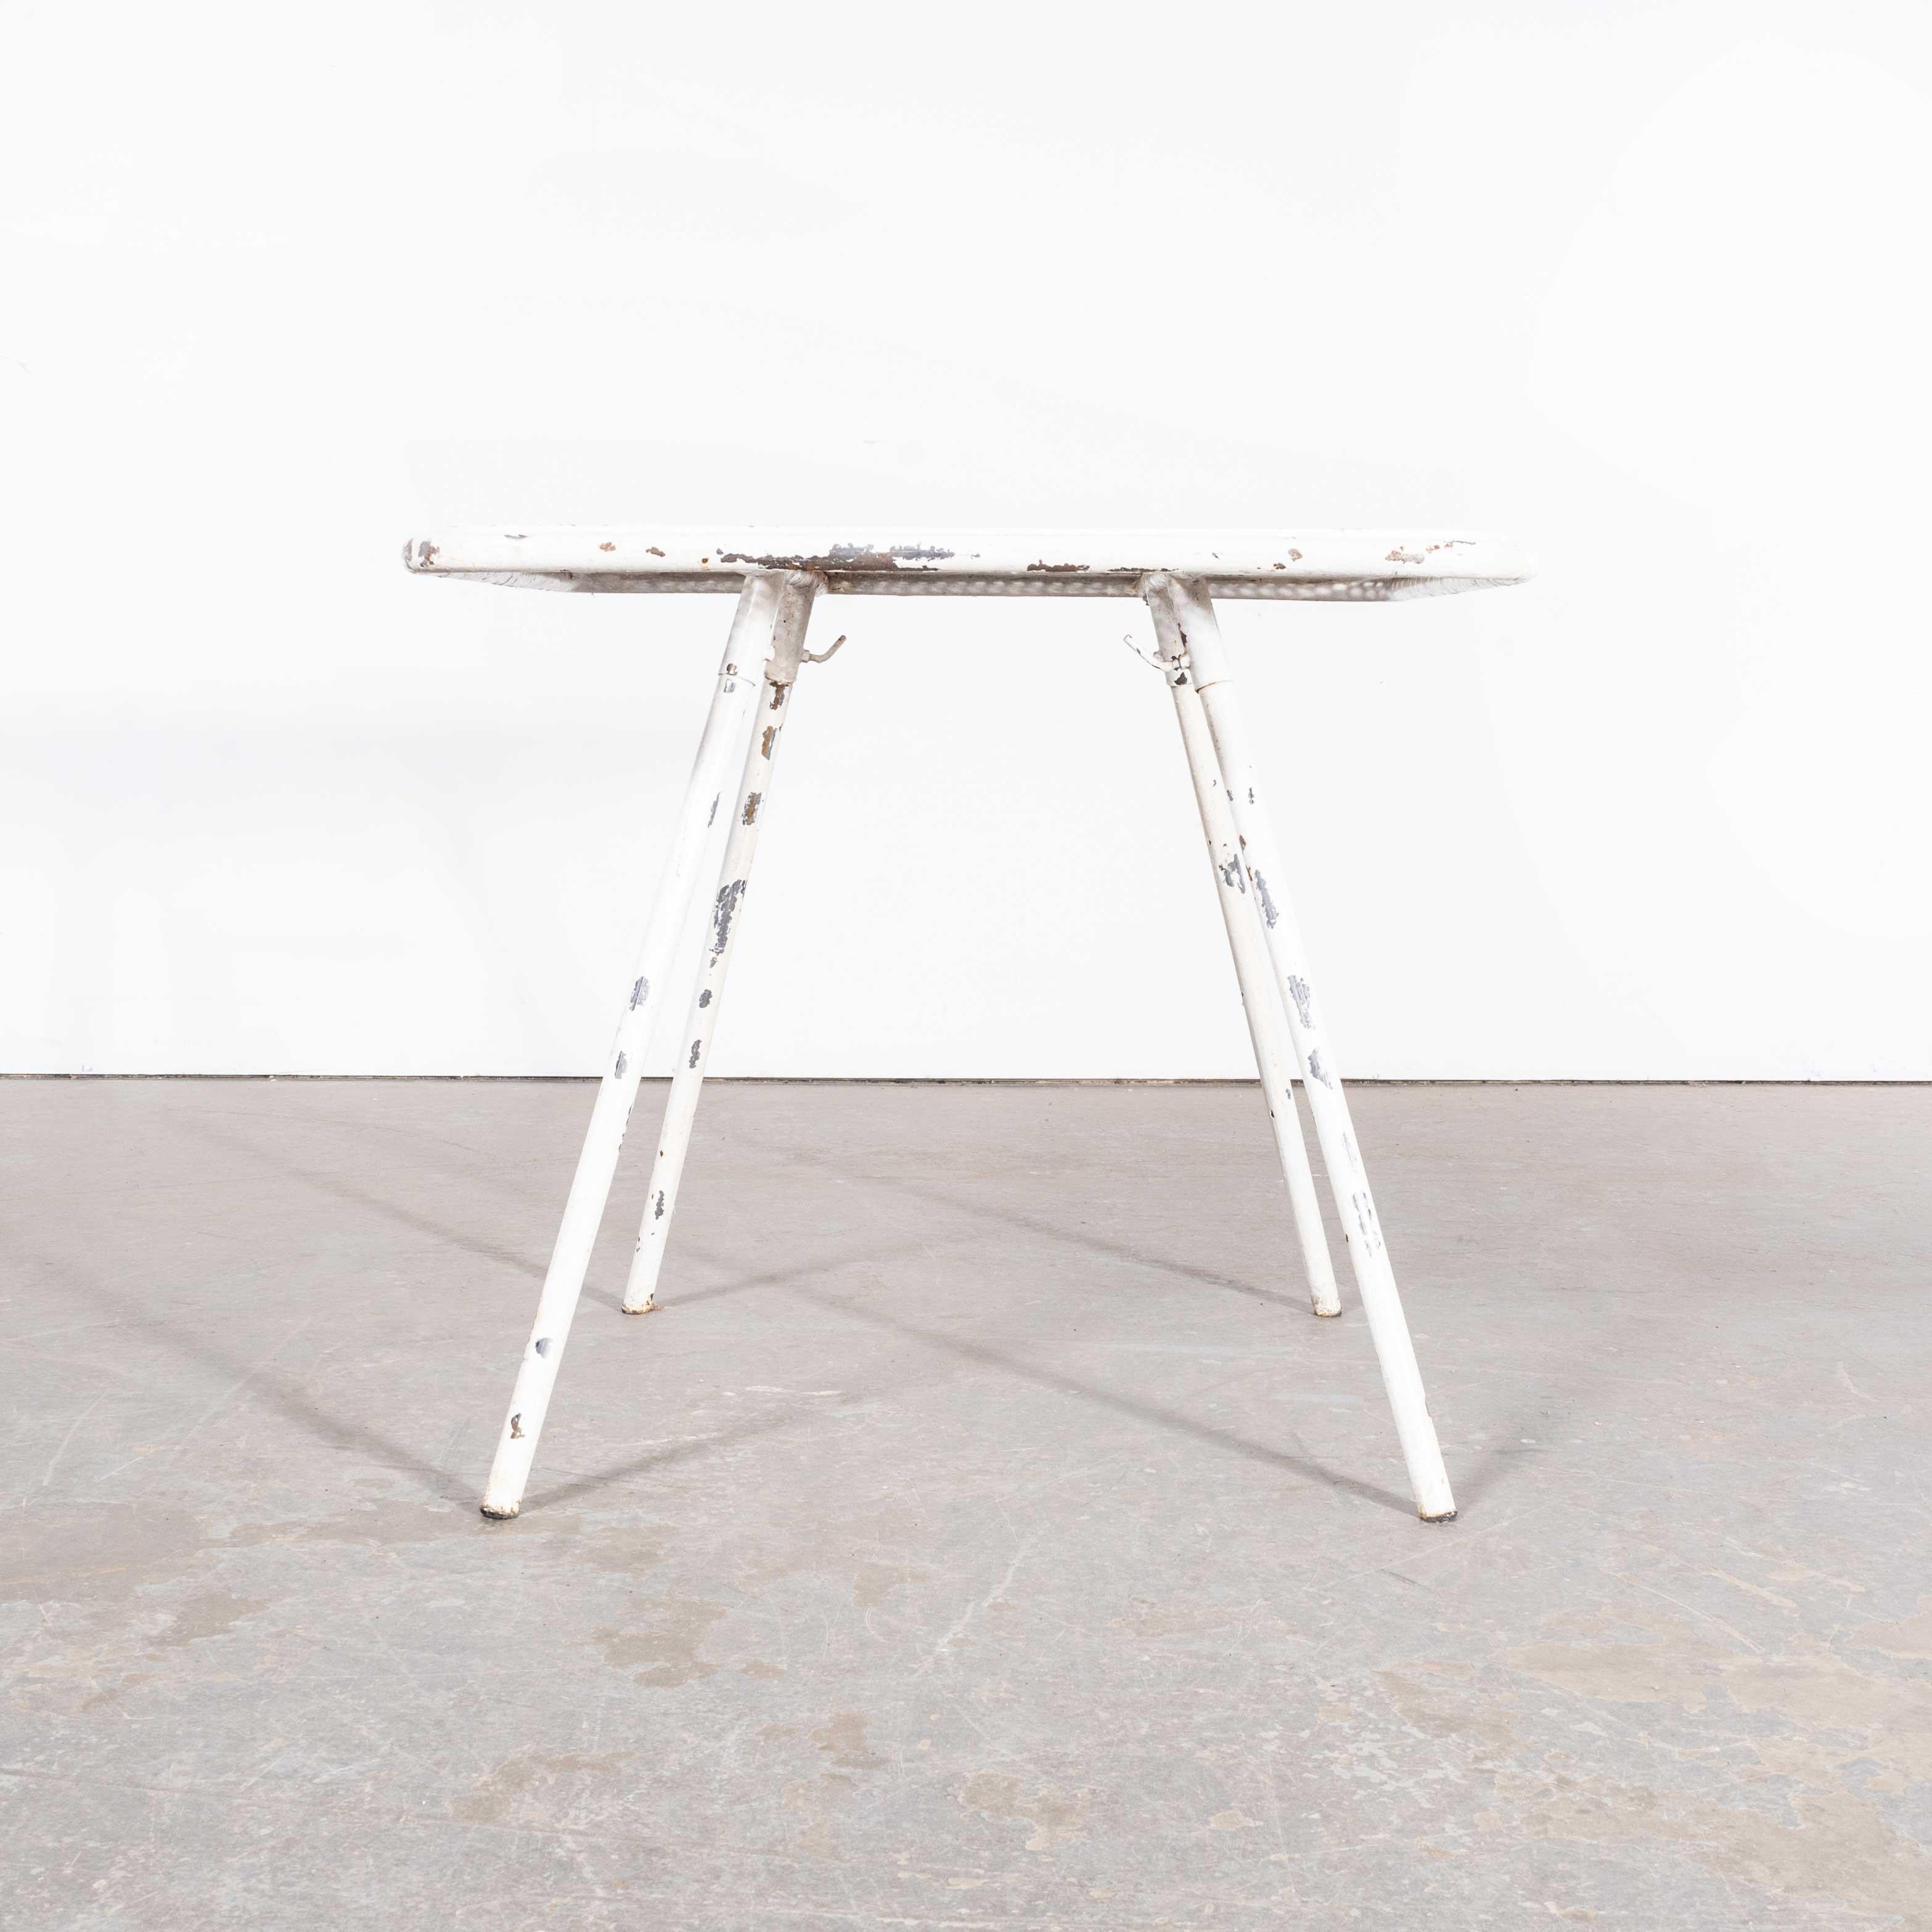 1950’s Original Rene Malaval White Square Outdoor Table
1950’s Original Rene Malaval White Square Outdoor Table. Rene Malaval was a welder by trade and after the war initiated the design of perhaps some of Frances most iconic industrial design.